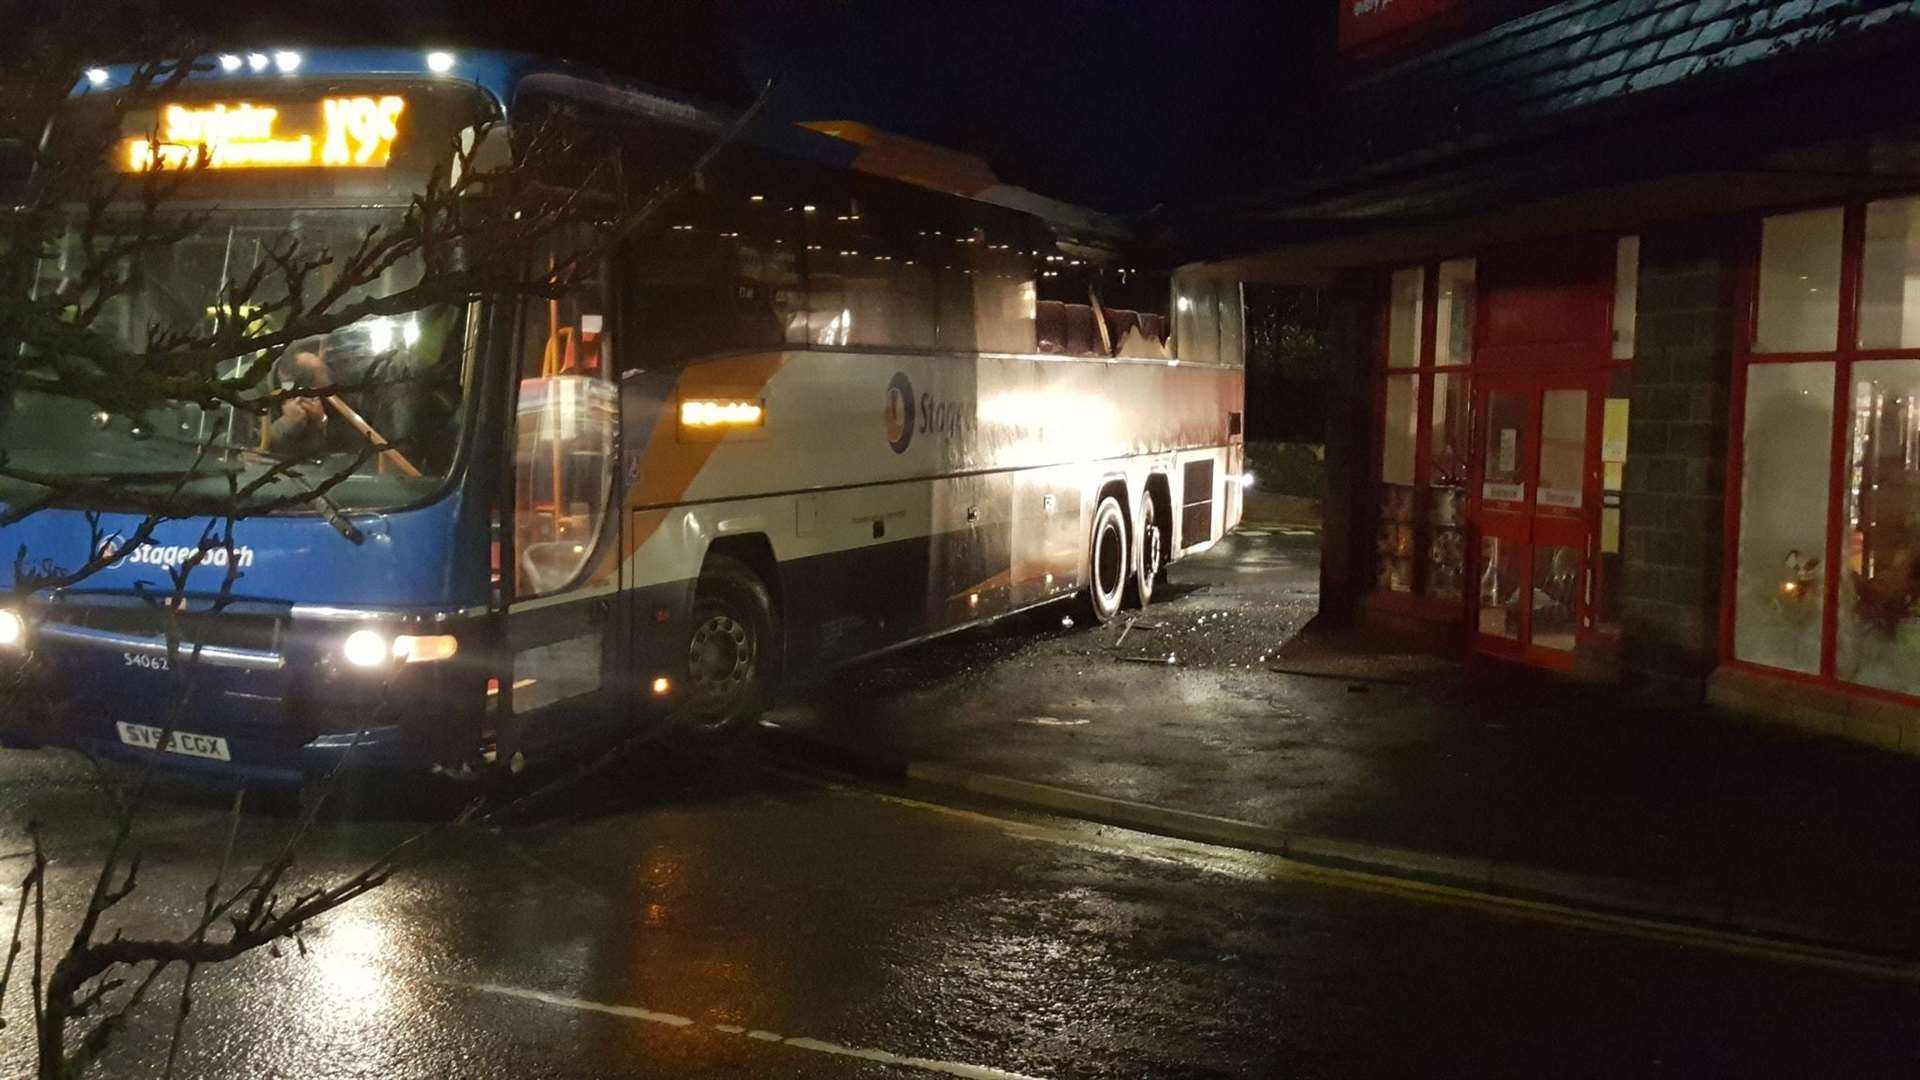 The bus slid down Whitechapel Road and struck the Poundstretcher store due to black ice. Picture: Jack O'Brien